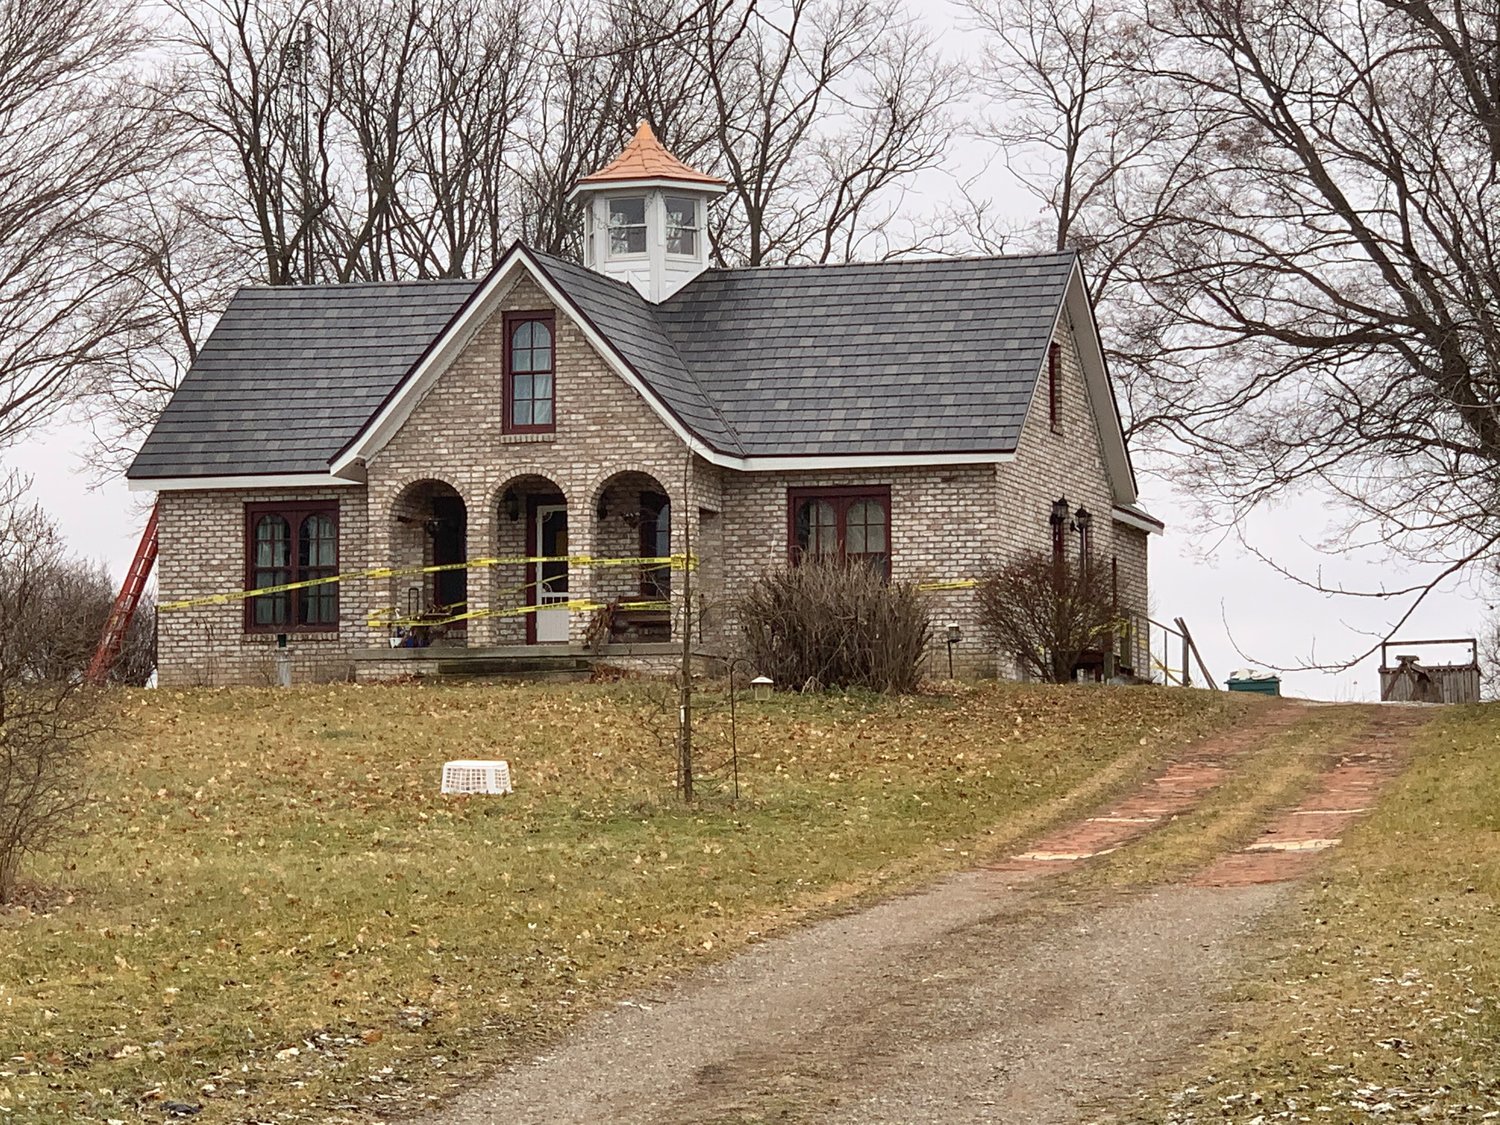 A recent homicide investigation led authorities to Mark Latunski's home on Tyrrell Road in rural Shiawassee County.